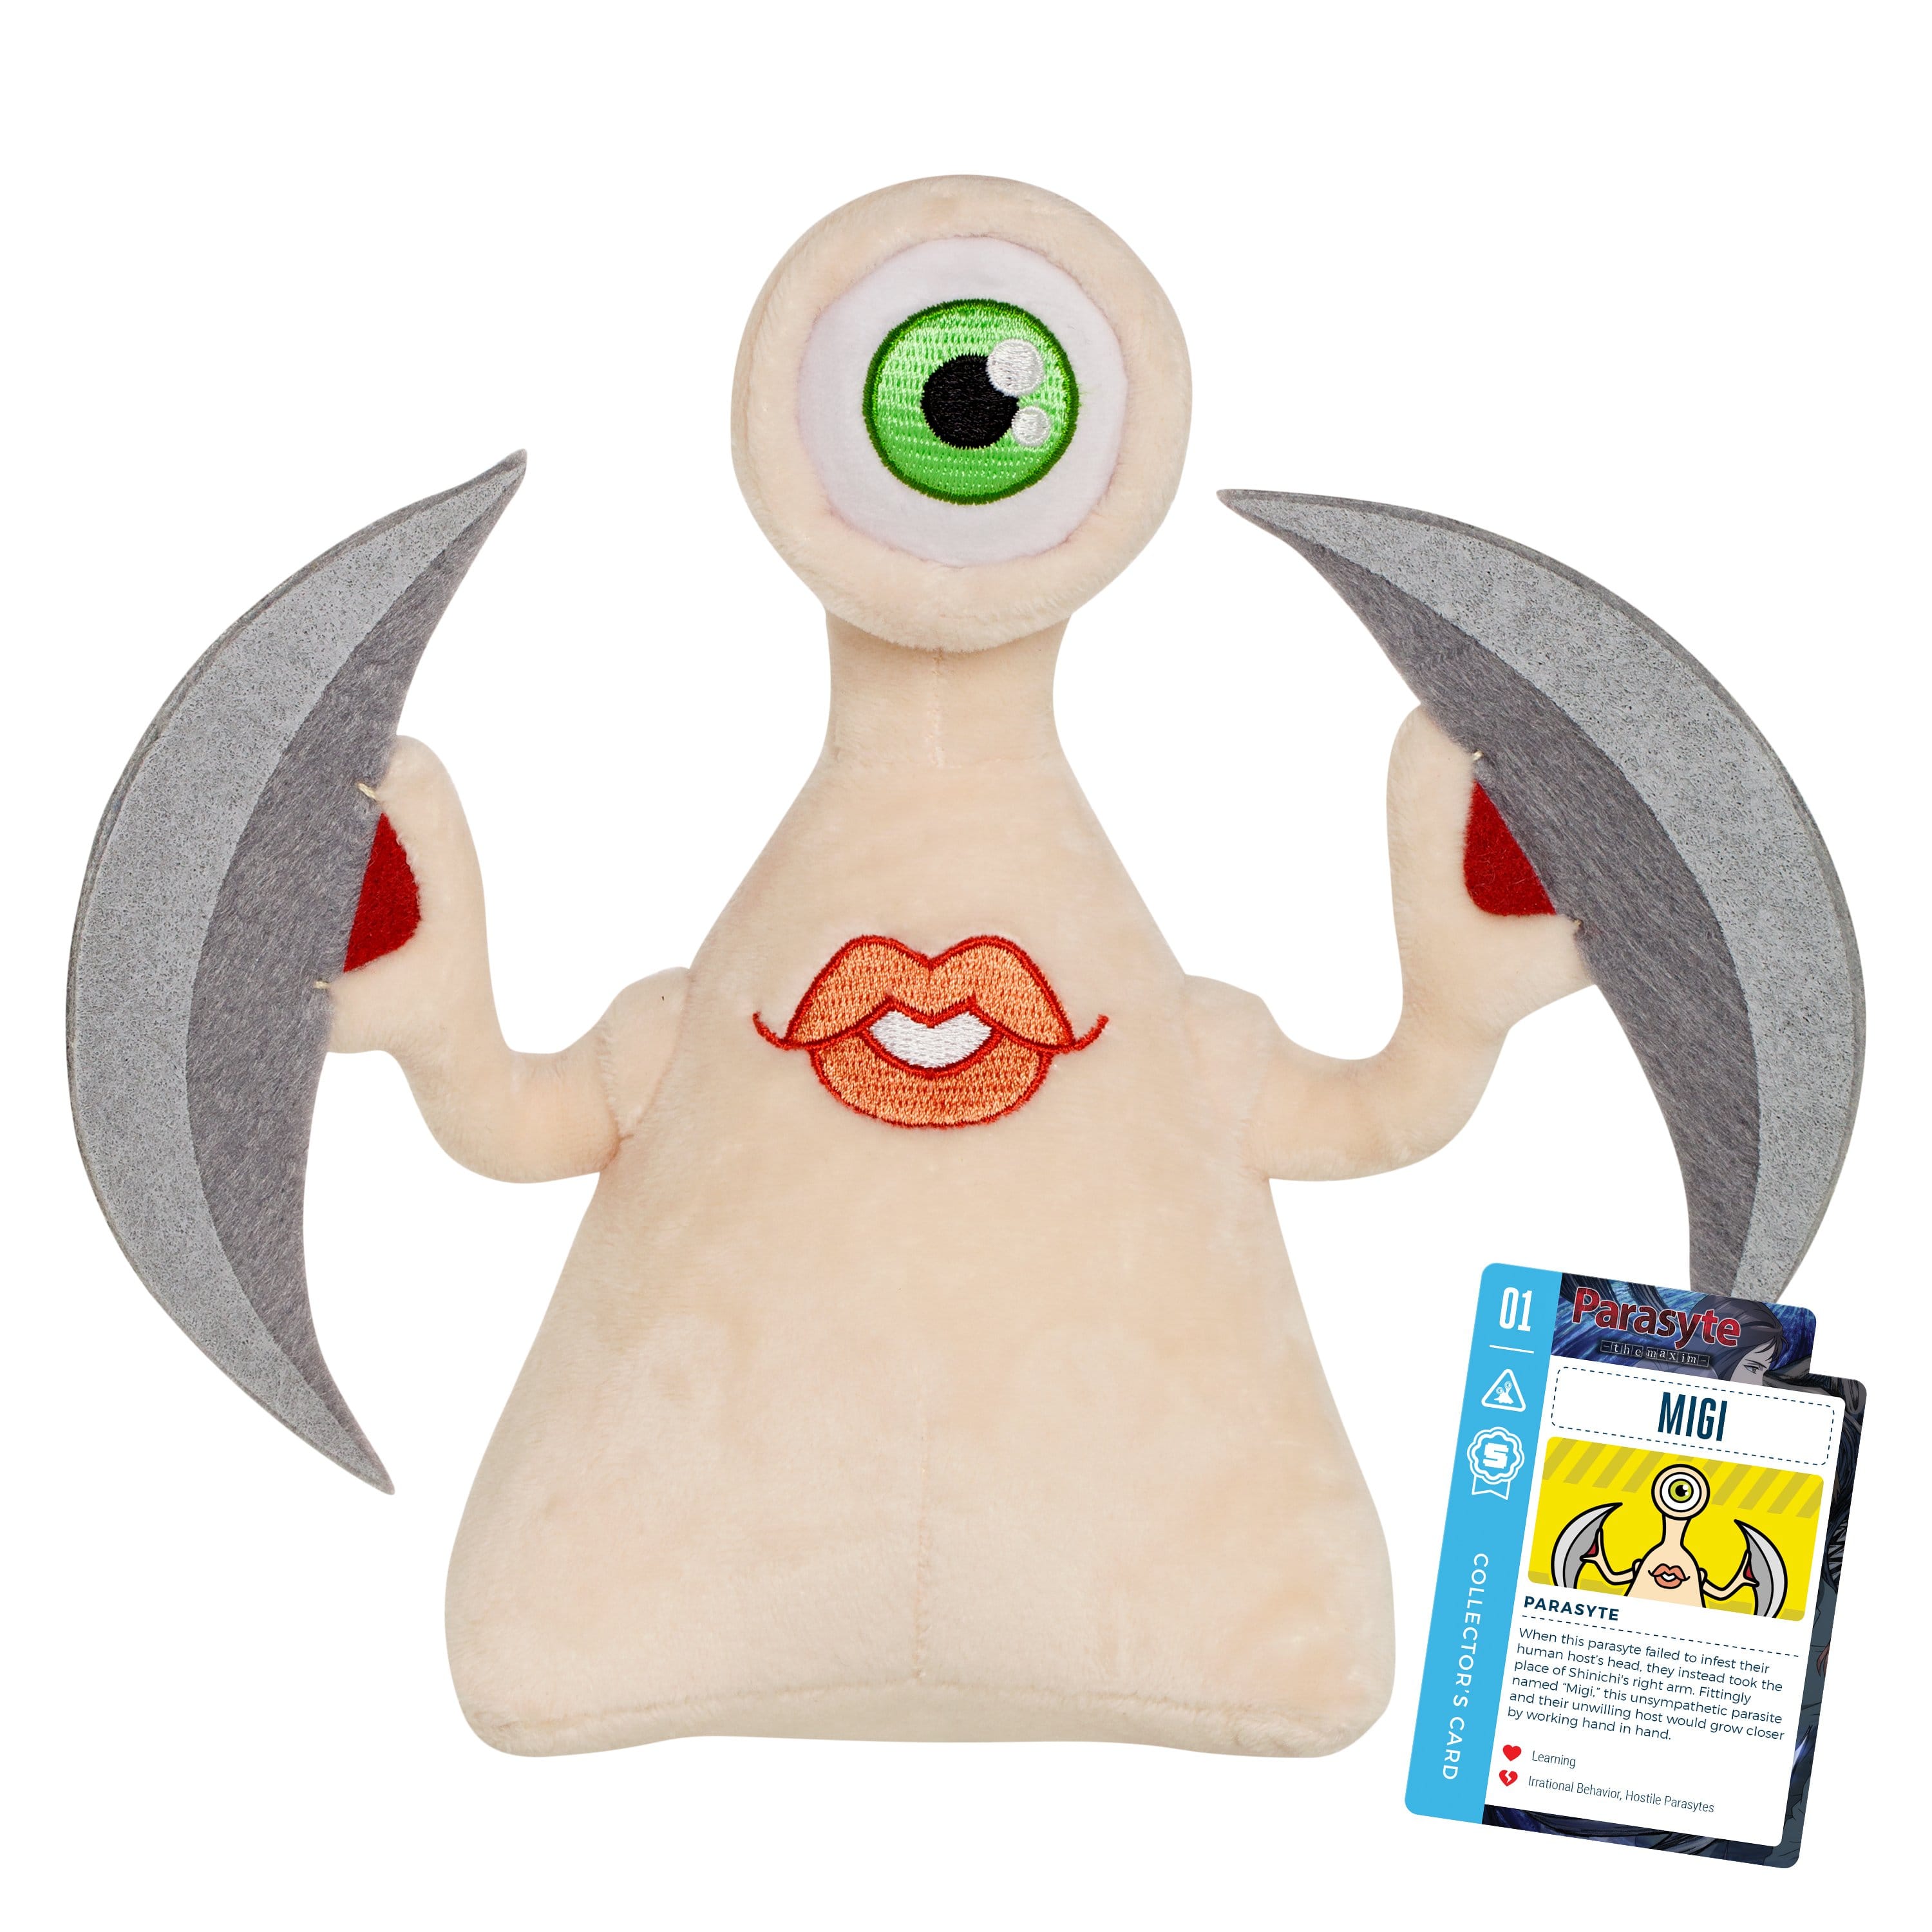 Parasyte - 7.5" Migi Collector's Stuffed Plush Toy With Collector's Card